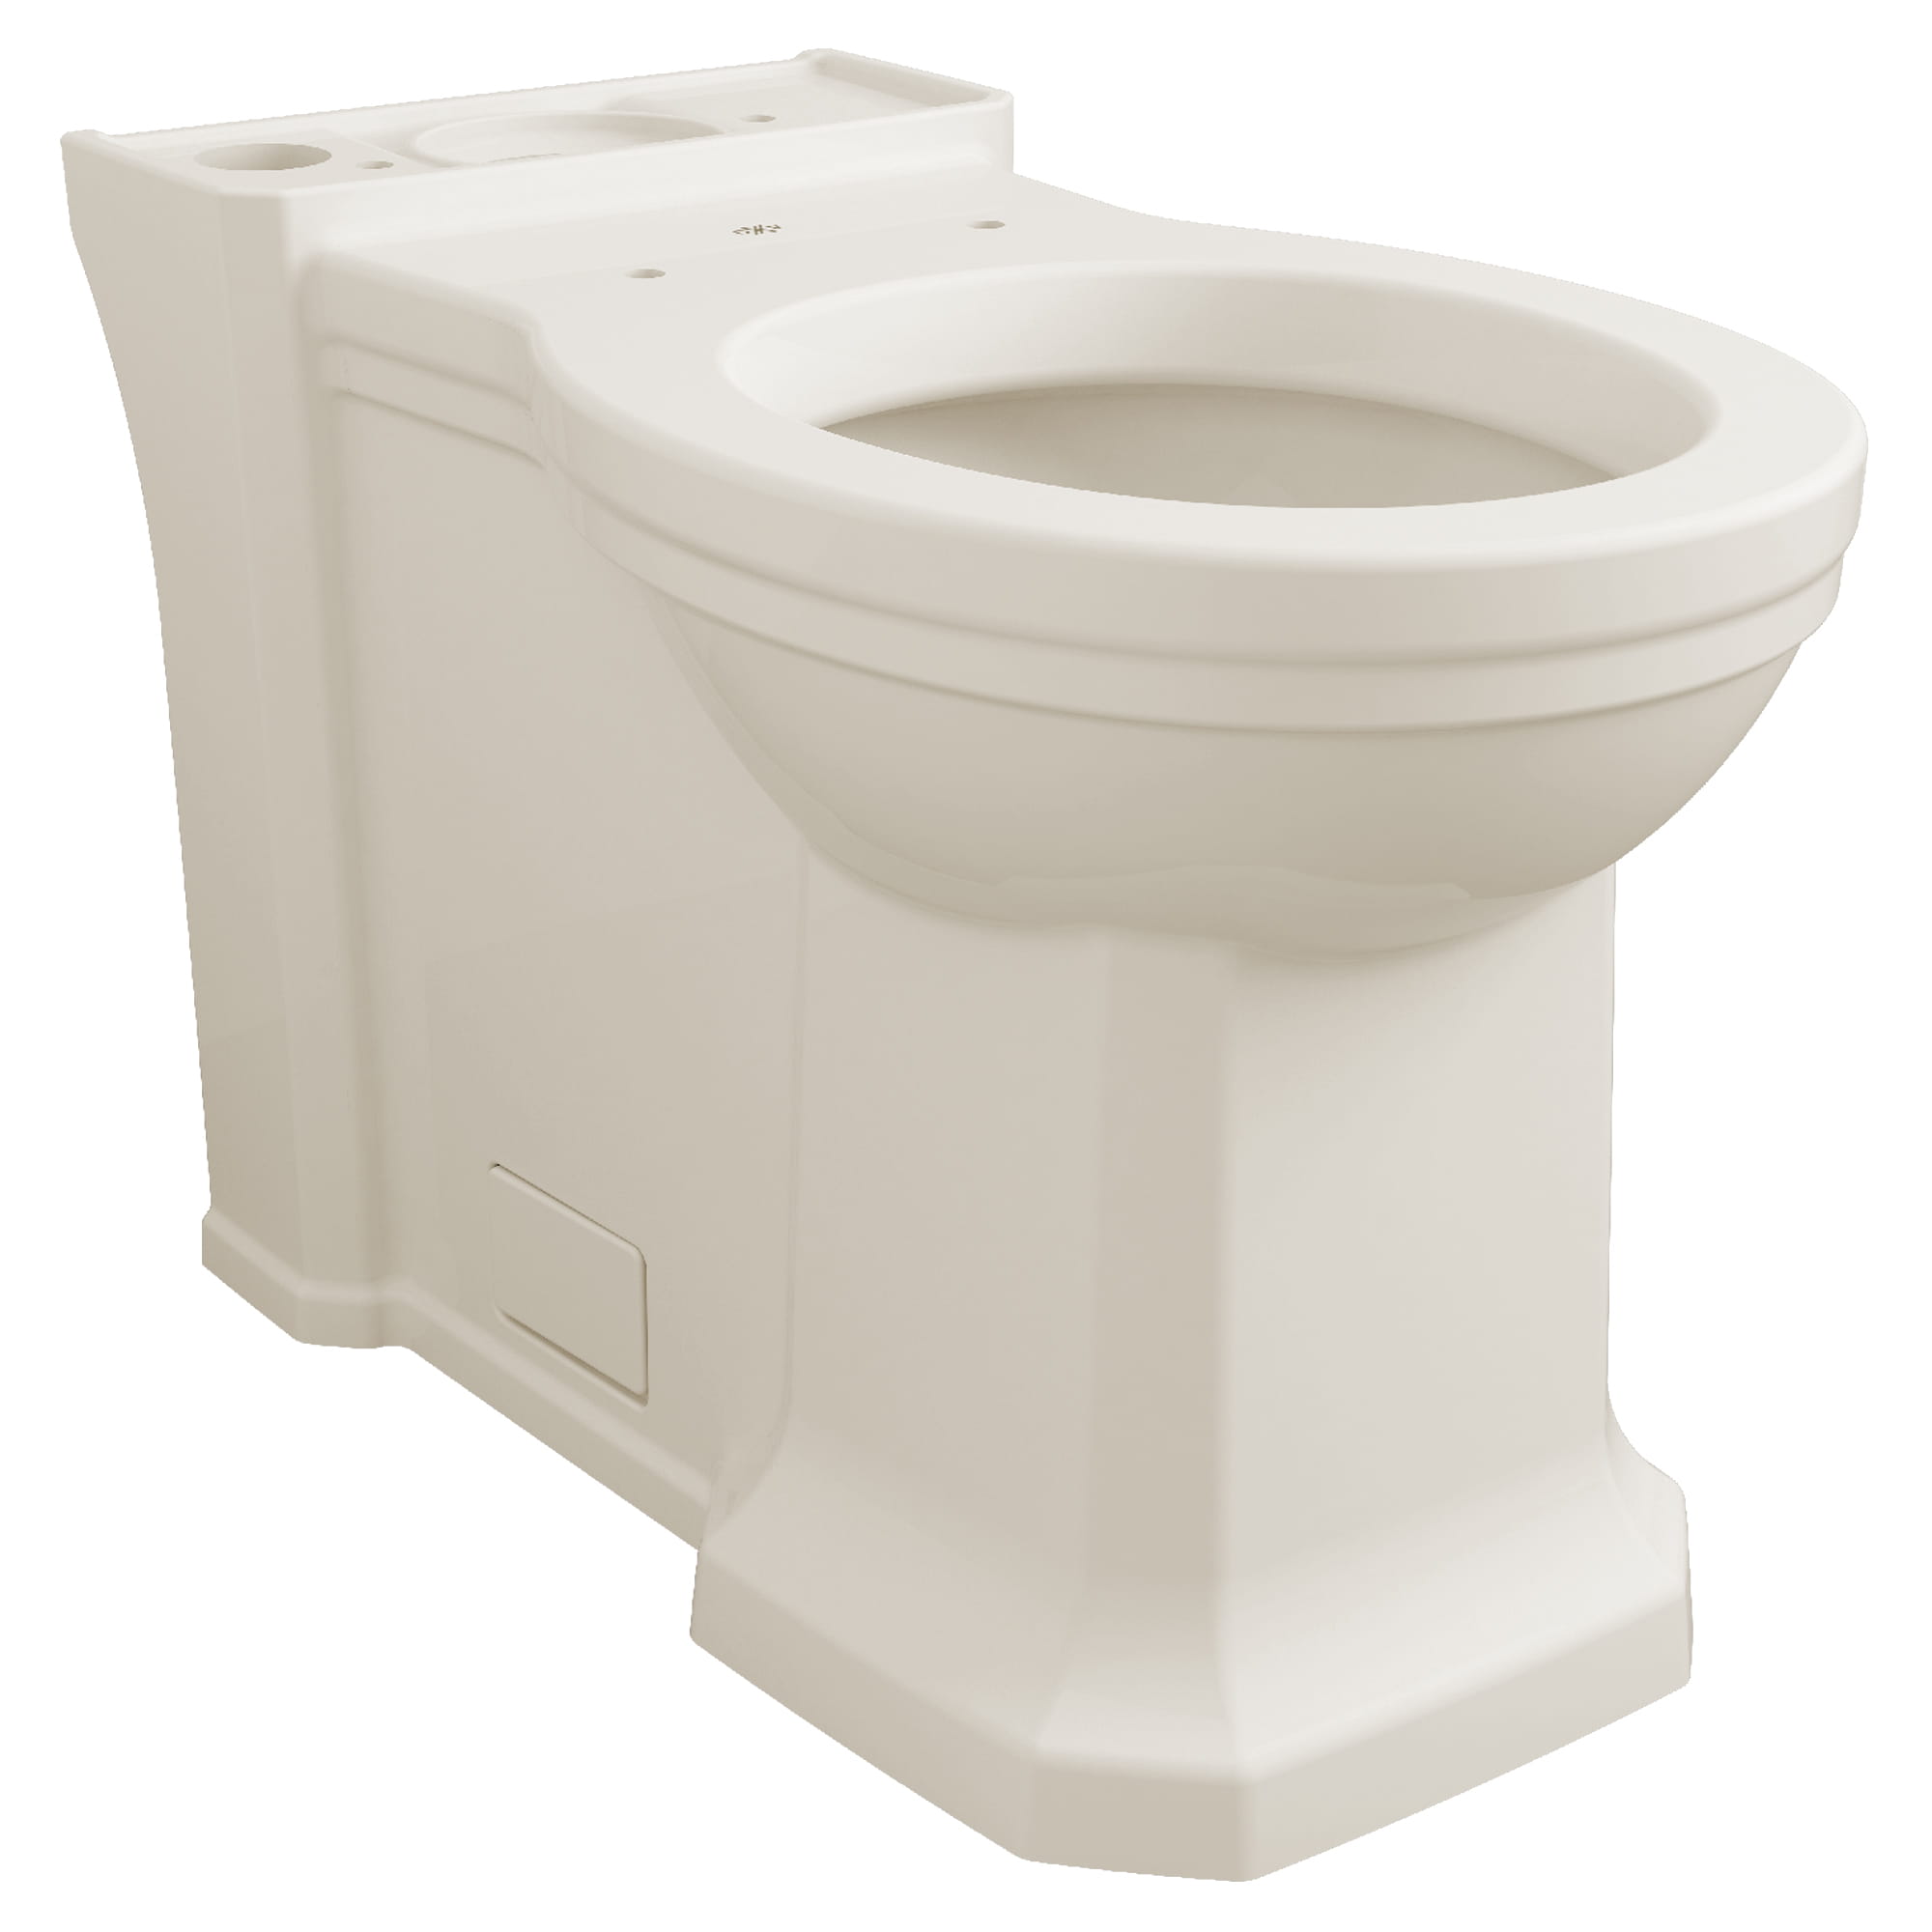 Fitzgerald Chair Height Round Front Toilet Bowl with Seat